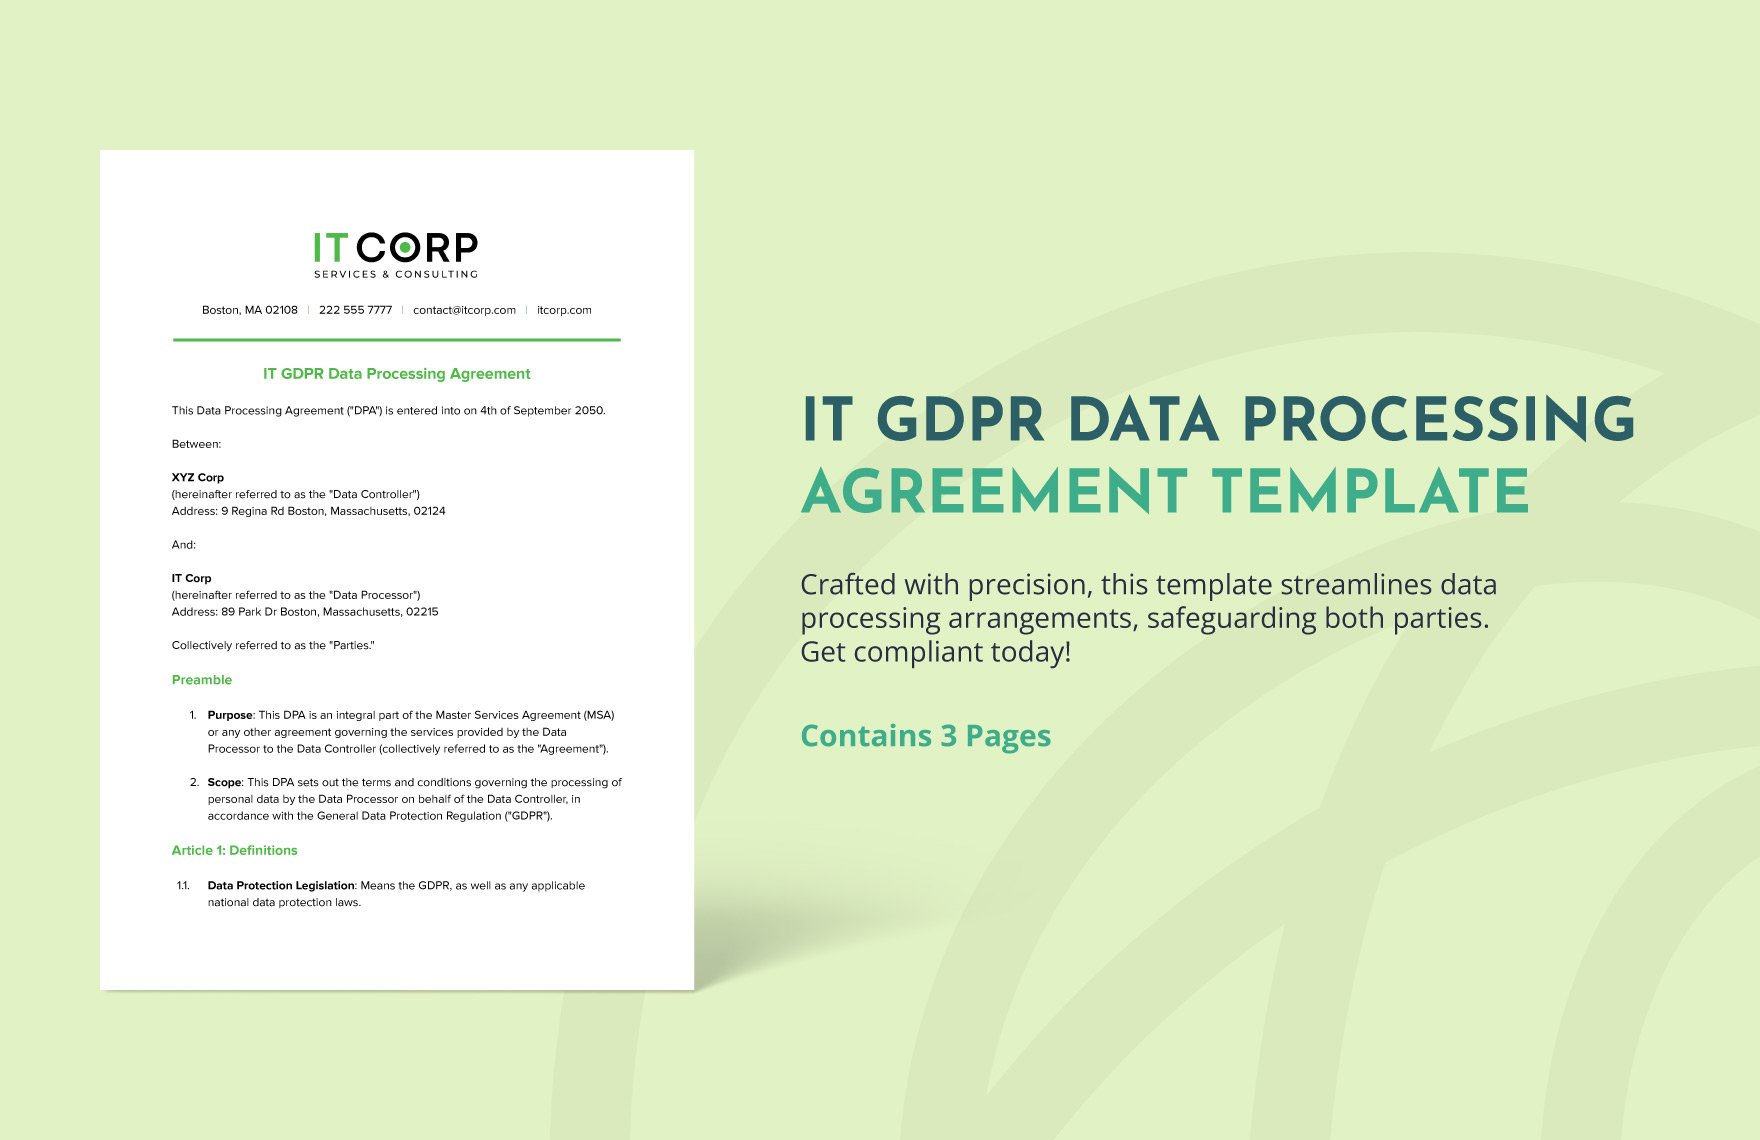 IT GDPR Data Processing Agreement Template